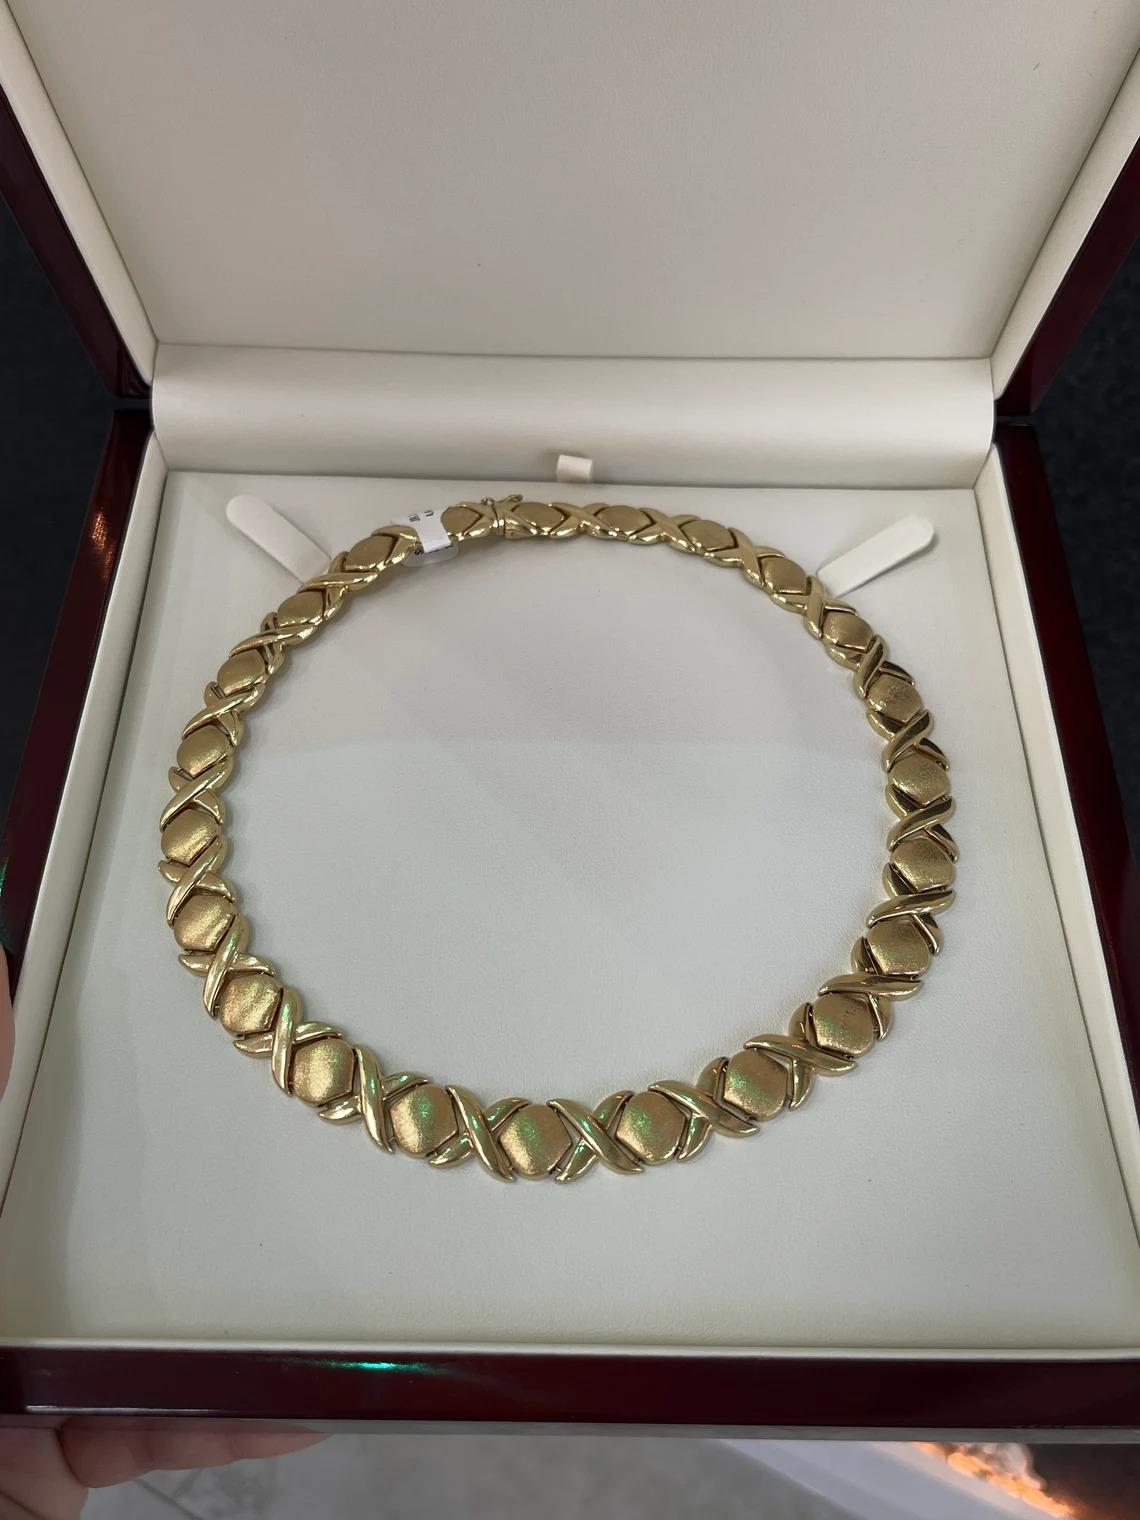 Featured is a classic, elegant, 17-inch gold necklace. This remarkable piece makes a statement anywhere that you may take it. It is crafted in solid 14K yellow gold with a unique 